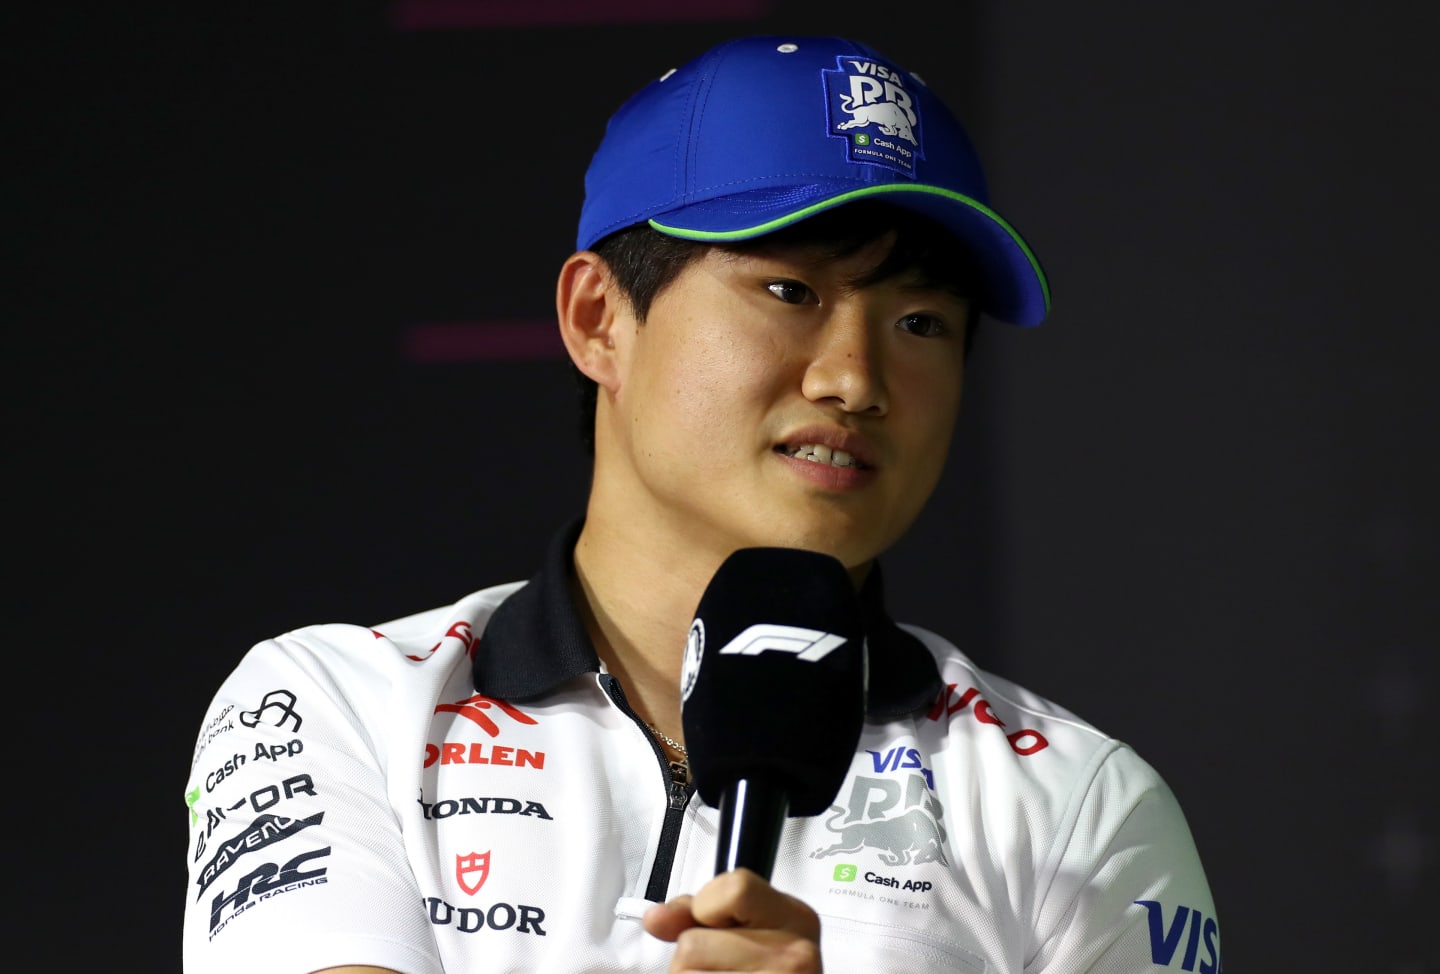 JEDDAH, SAUDI ARABIA - MARCH 06: Yuki Tsunoda of Japan and Visa Cash App RB attends the Drivers Press Conference during previews ahead of the F1 Grand Prix of Saudi Arabia at Jeddah Corniche Circuit on March 06, 2024 in Jeddah, Saudi Arabia. (Photo by Peter Fox/Getty Images)